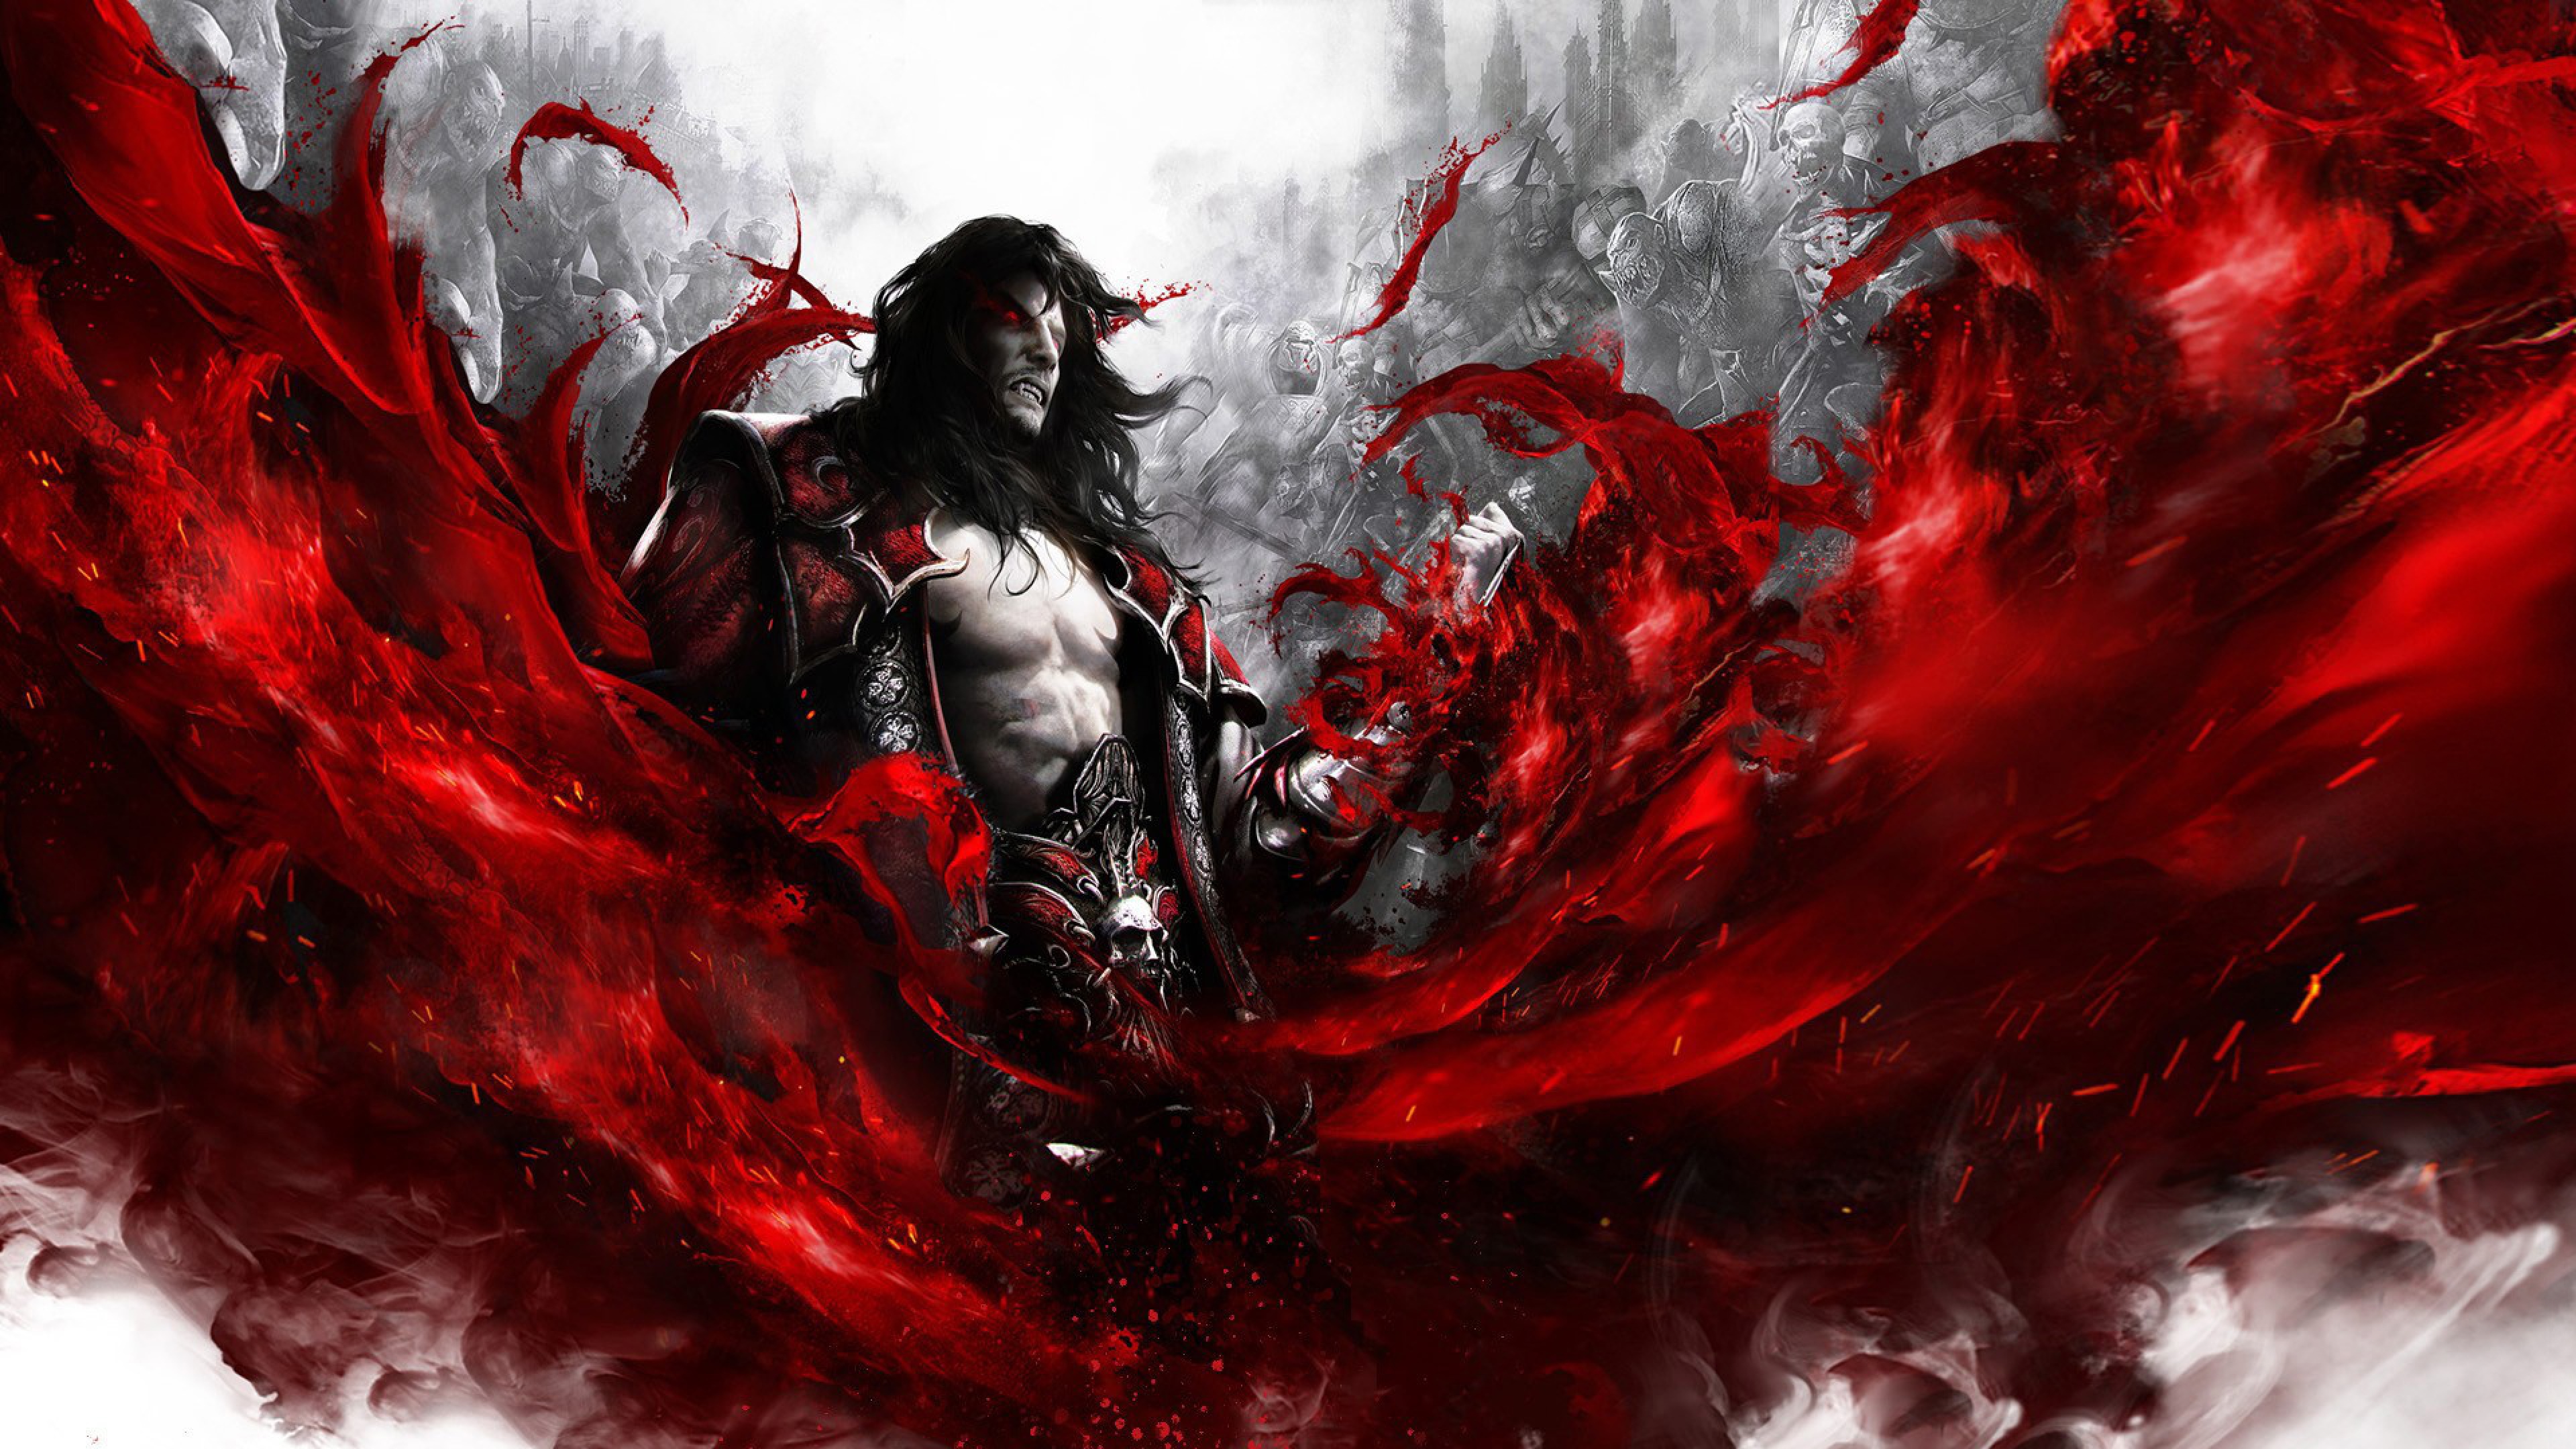 Castlevania Lords Of Shadow 2 – PS4Wallpapers.com - 3840 x 2160 jpeg 2396kB